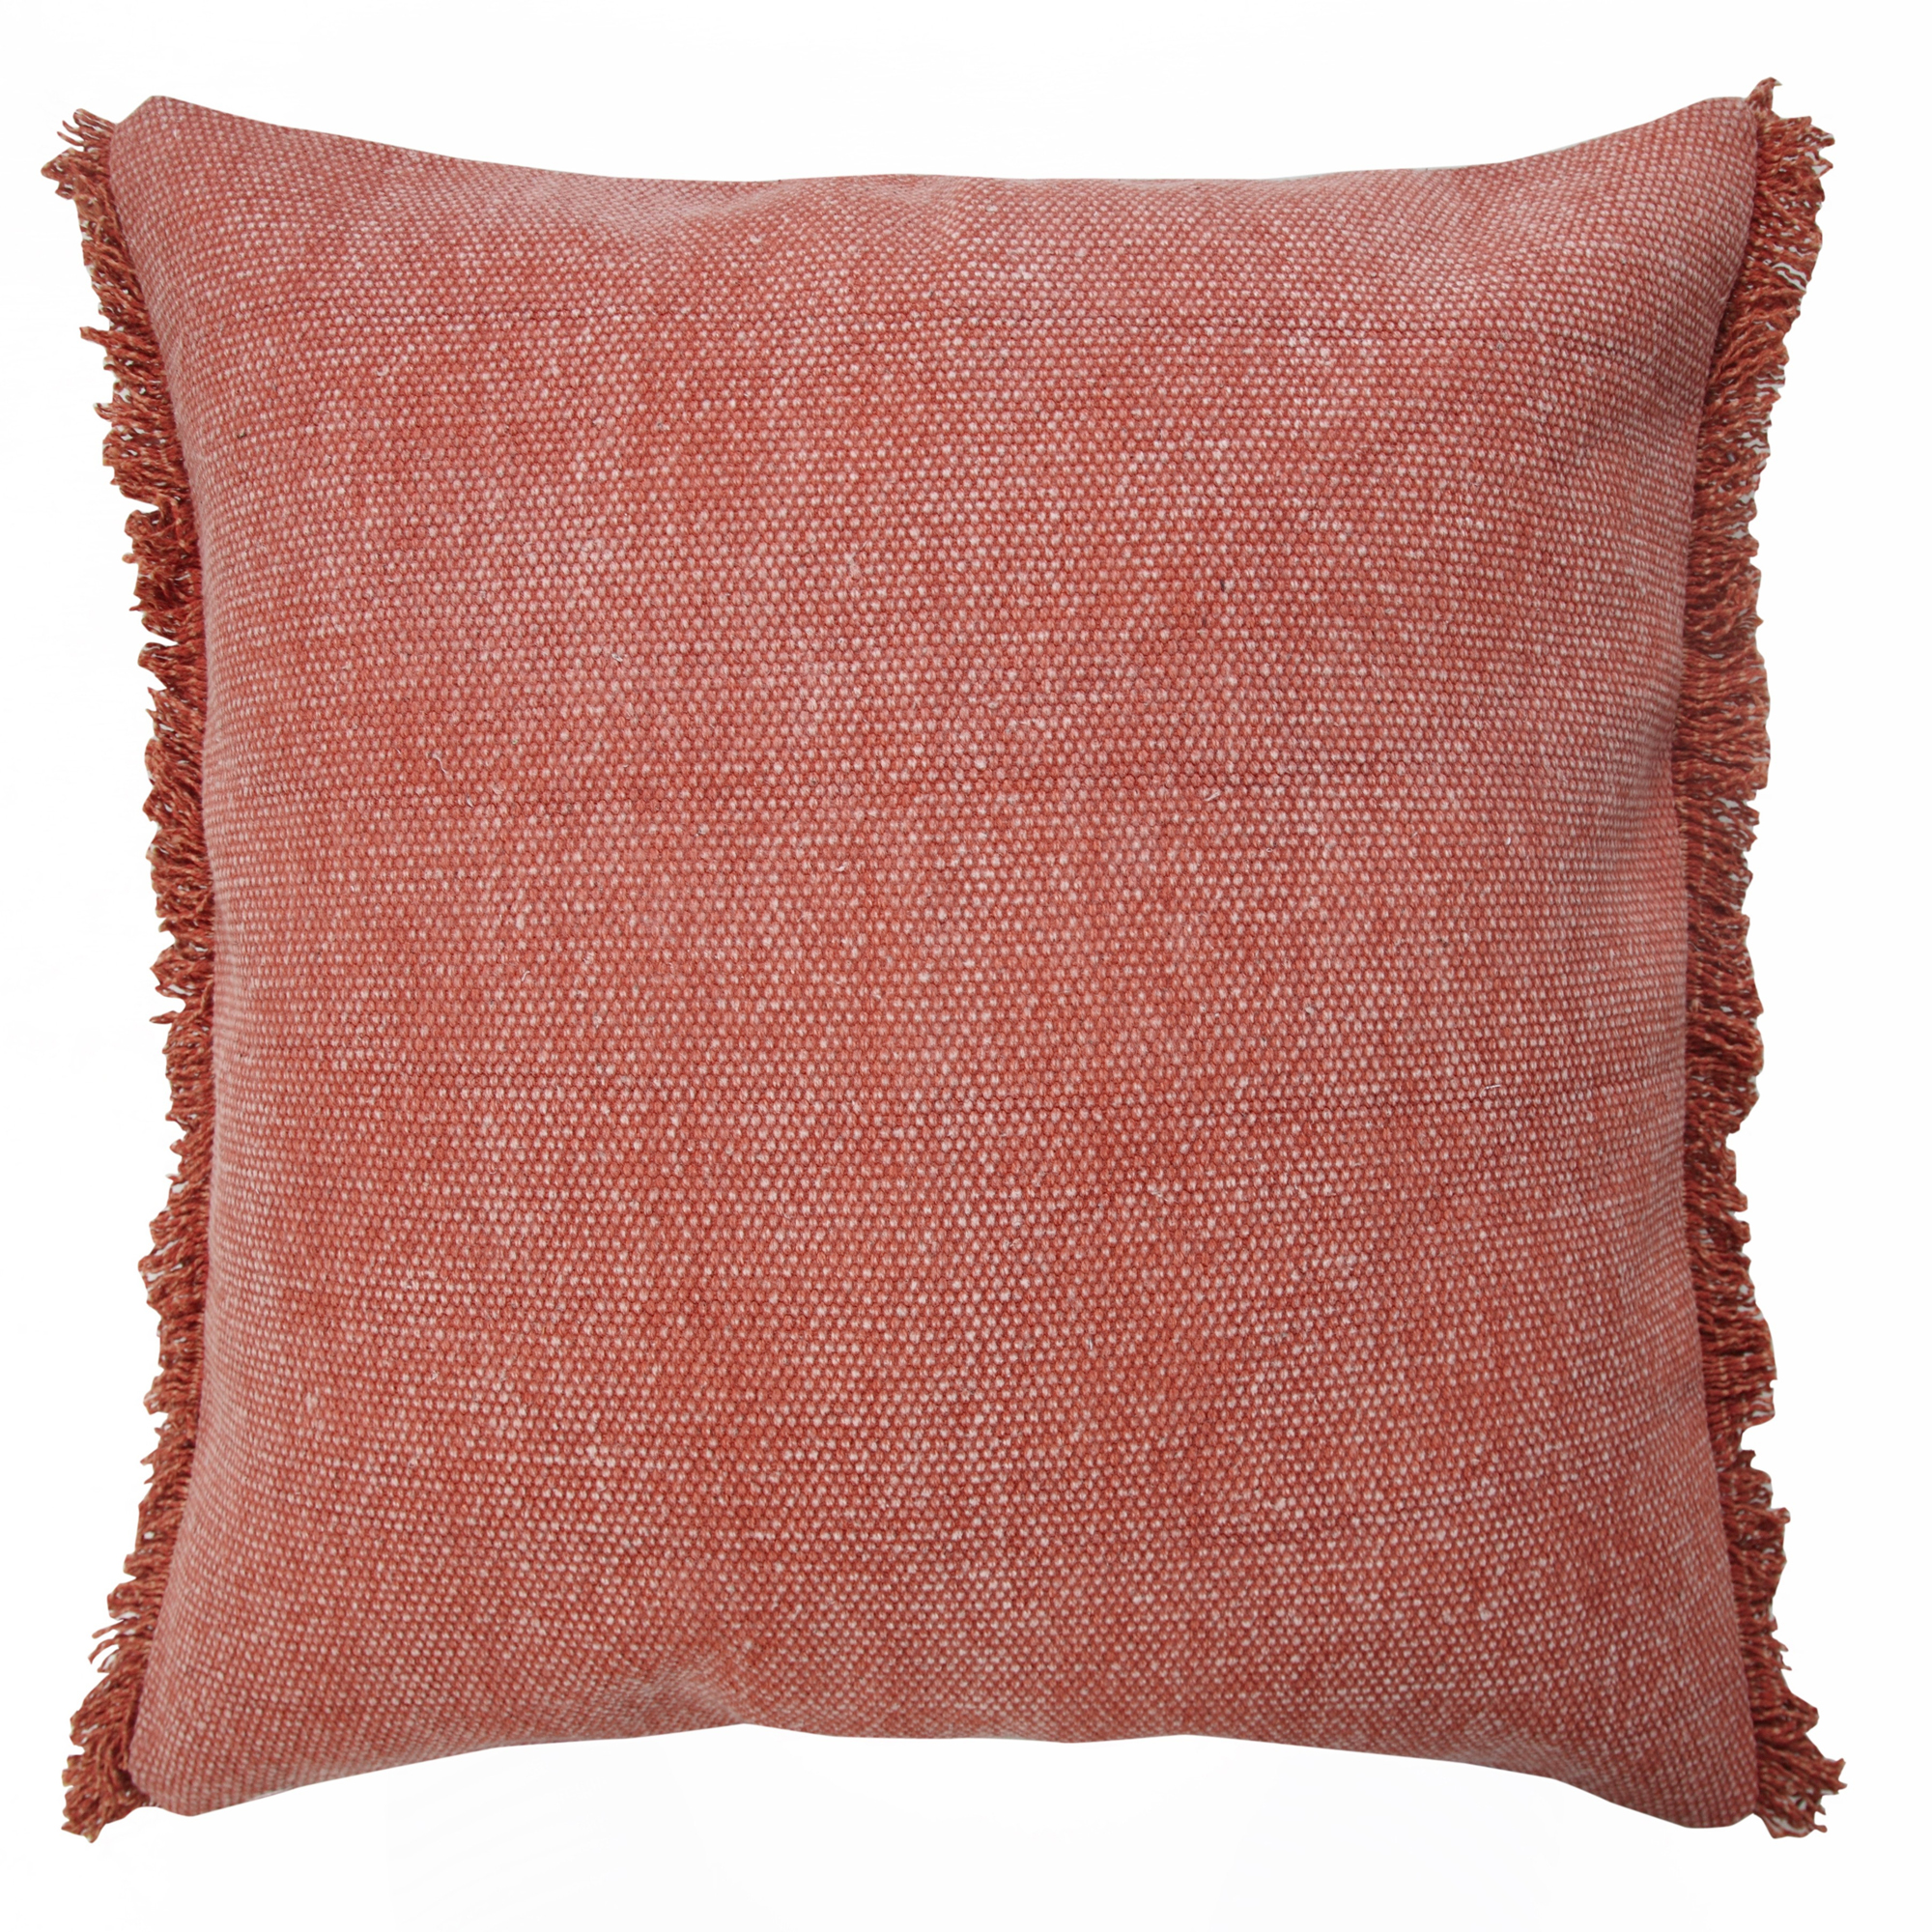 20" X 20" Dusty Rose Pink And Muted Clay 100% Cotton Zippered Pillow-516958-1